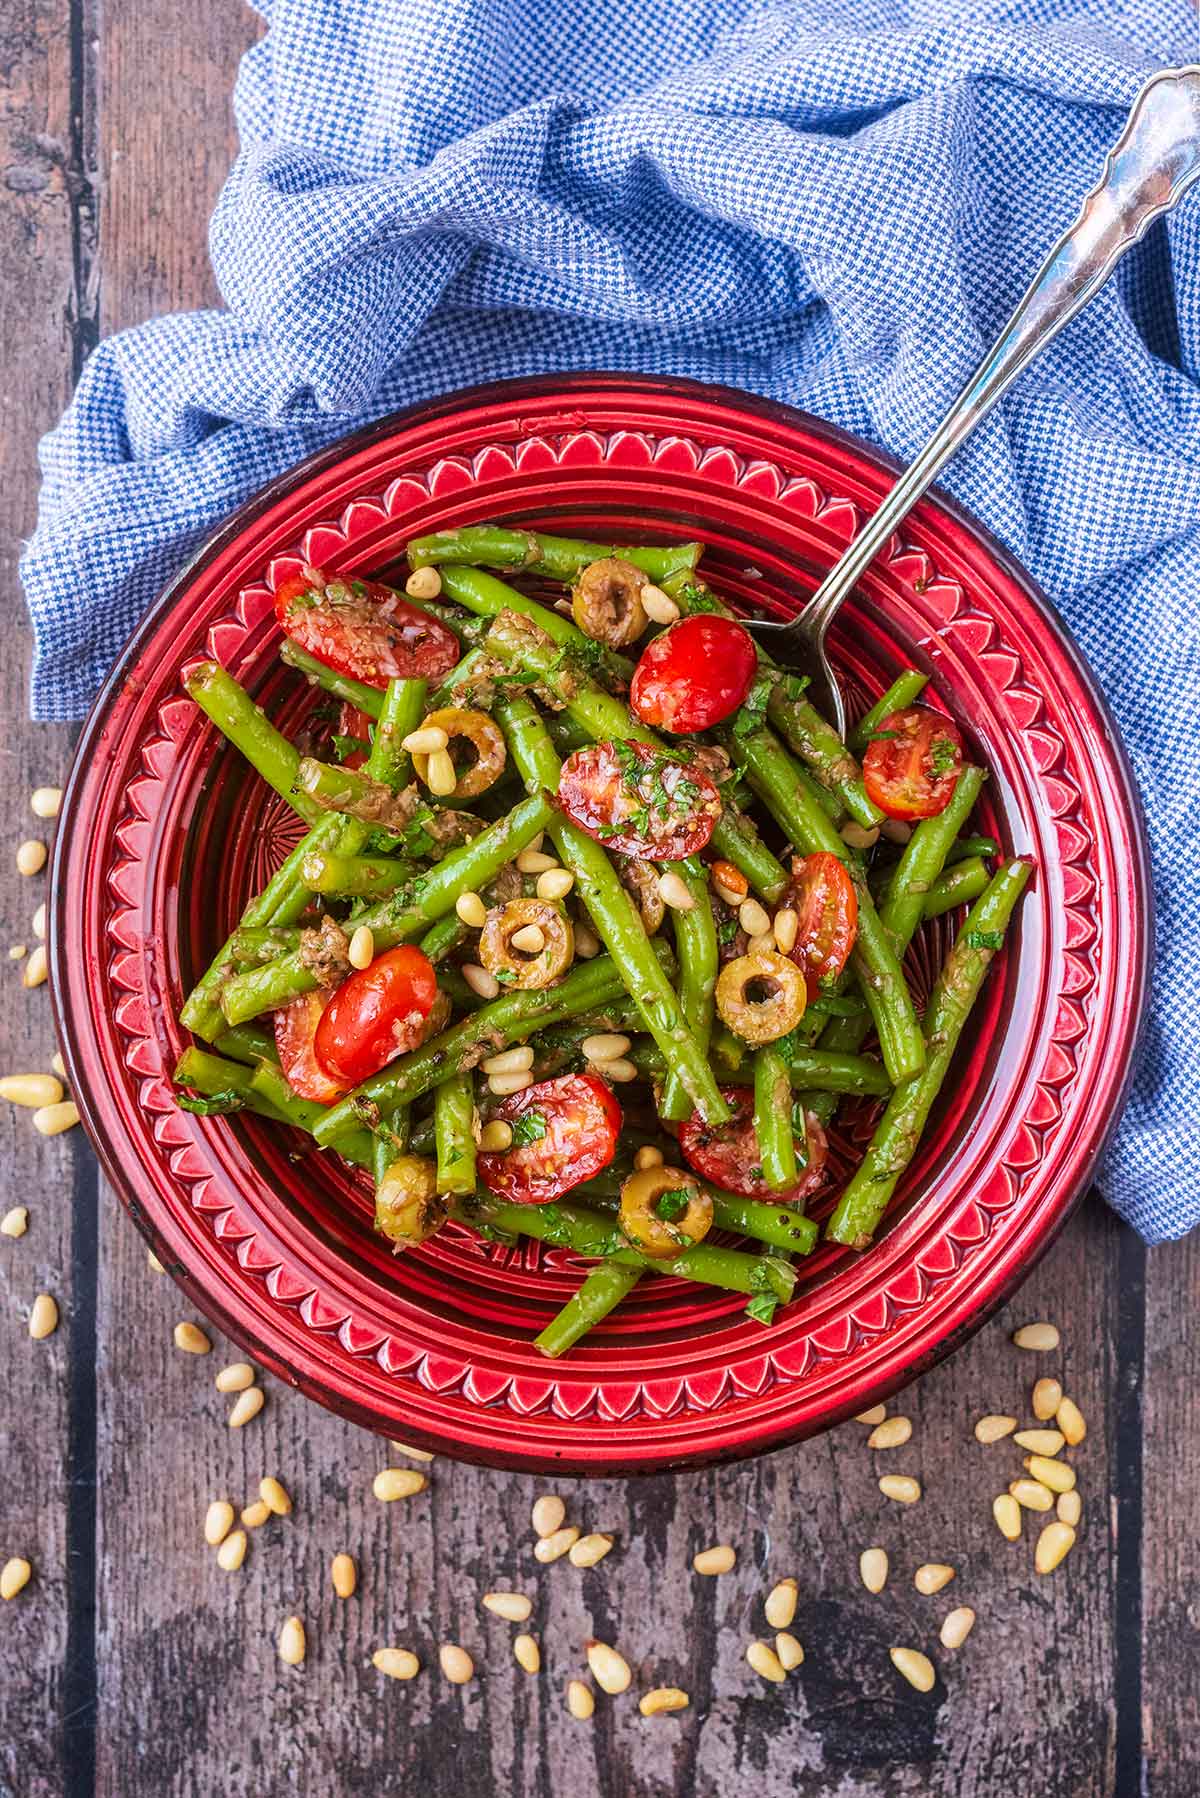 A red bowl full of green beans and cherry tomatoes covered in a dressing.